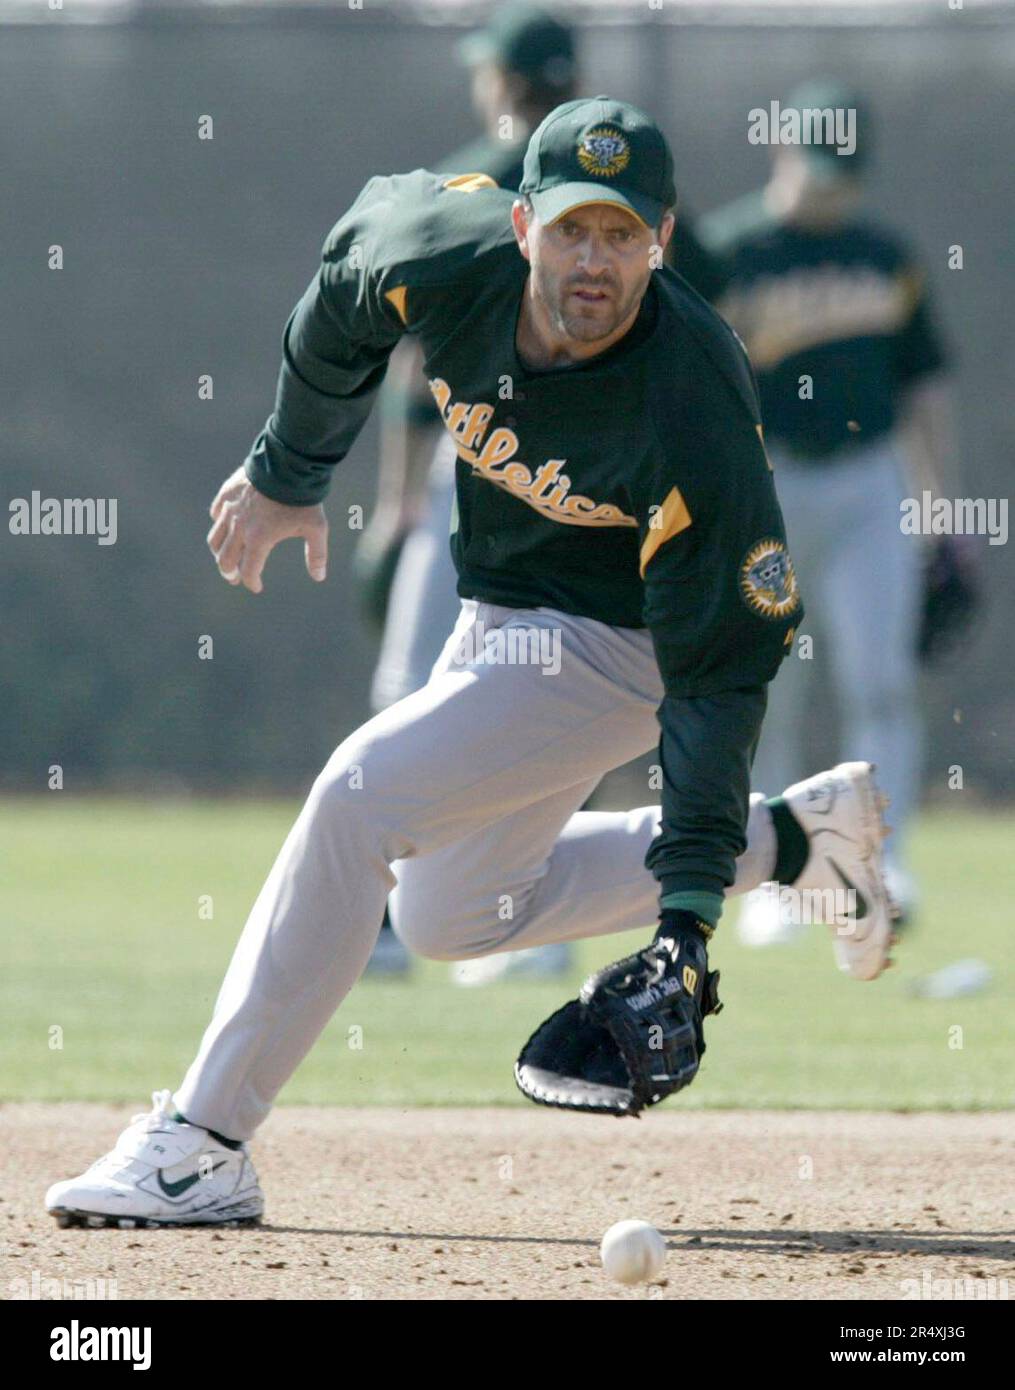 athletics27 466 pc.JPG Eric Karros took grounders at first base during an  infield drill. The Oakland Athletics held its first full-squad workout on  2/26/04 in Phoenix, AZ. PAUL CHINN / The Chronicle (